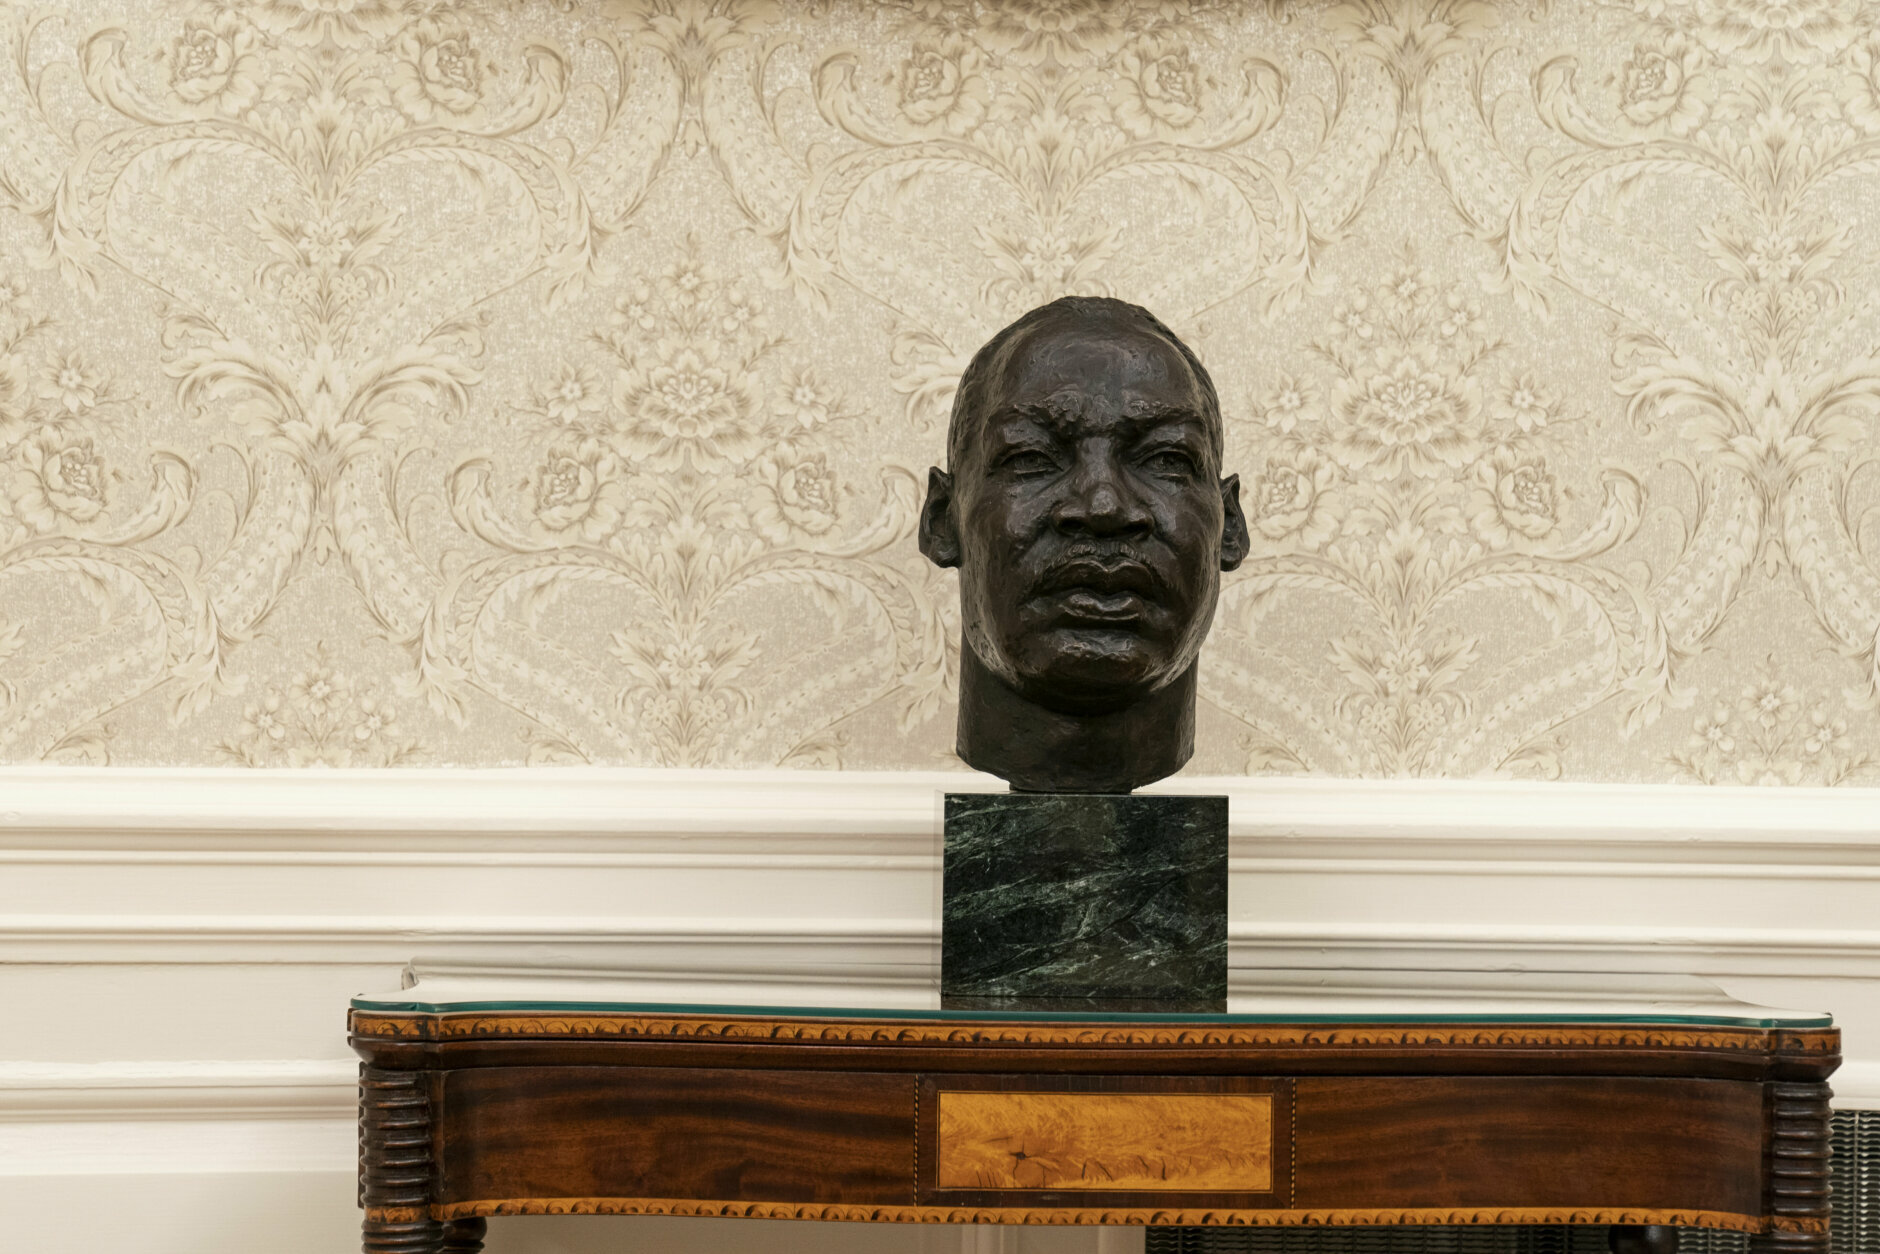 The Oval Office of the White House is newly redecorated for the first day of President Joe Biden's administration, Wednesday, Jan. 20, 2021, in Washington, including a bust of civil rights leader Rev. Martin Luther King Jr.. (AP Photo/Alex Brandon)